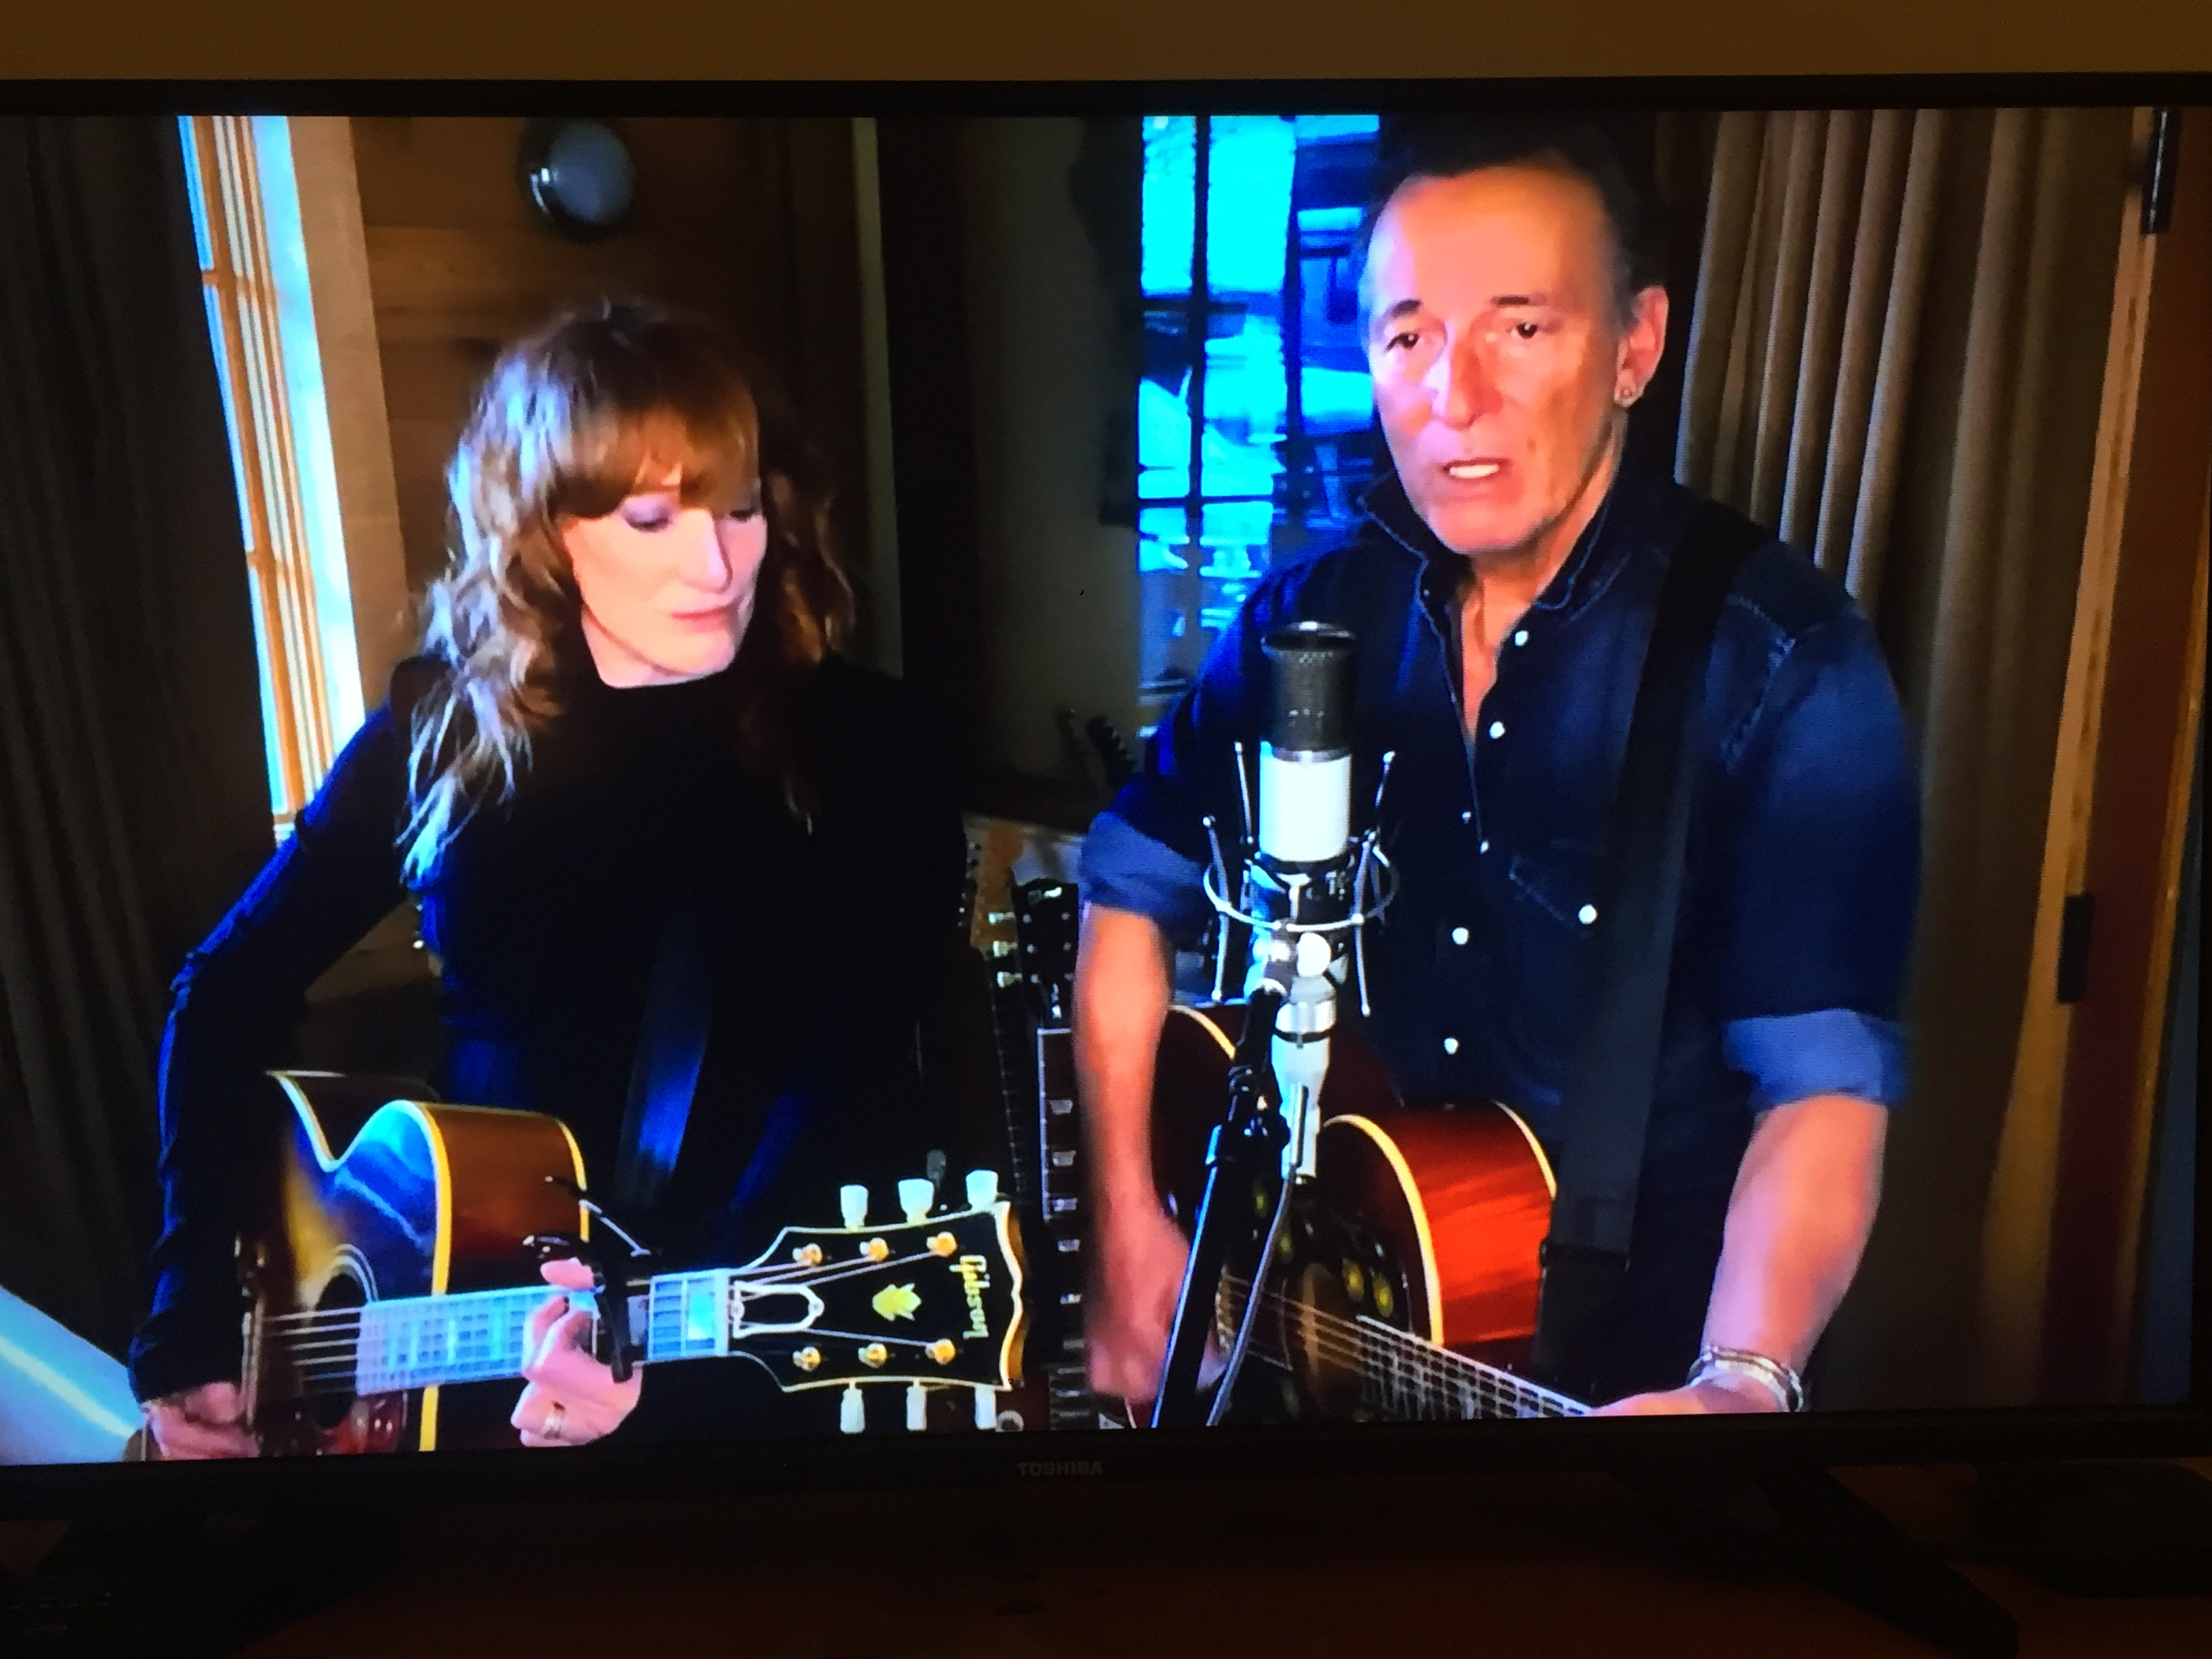 Bruce Springsteen Discusses Dion, The Saxophone, His Wife Patti’s Vocal Production And Playing Guitar On Dion’s ‘Blues With Friends’